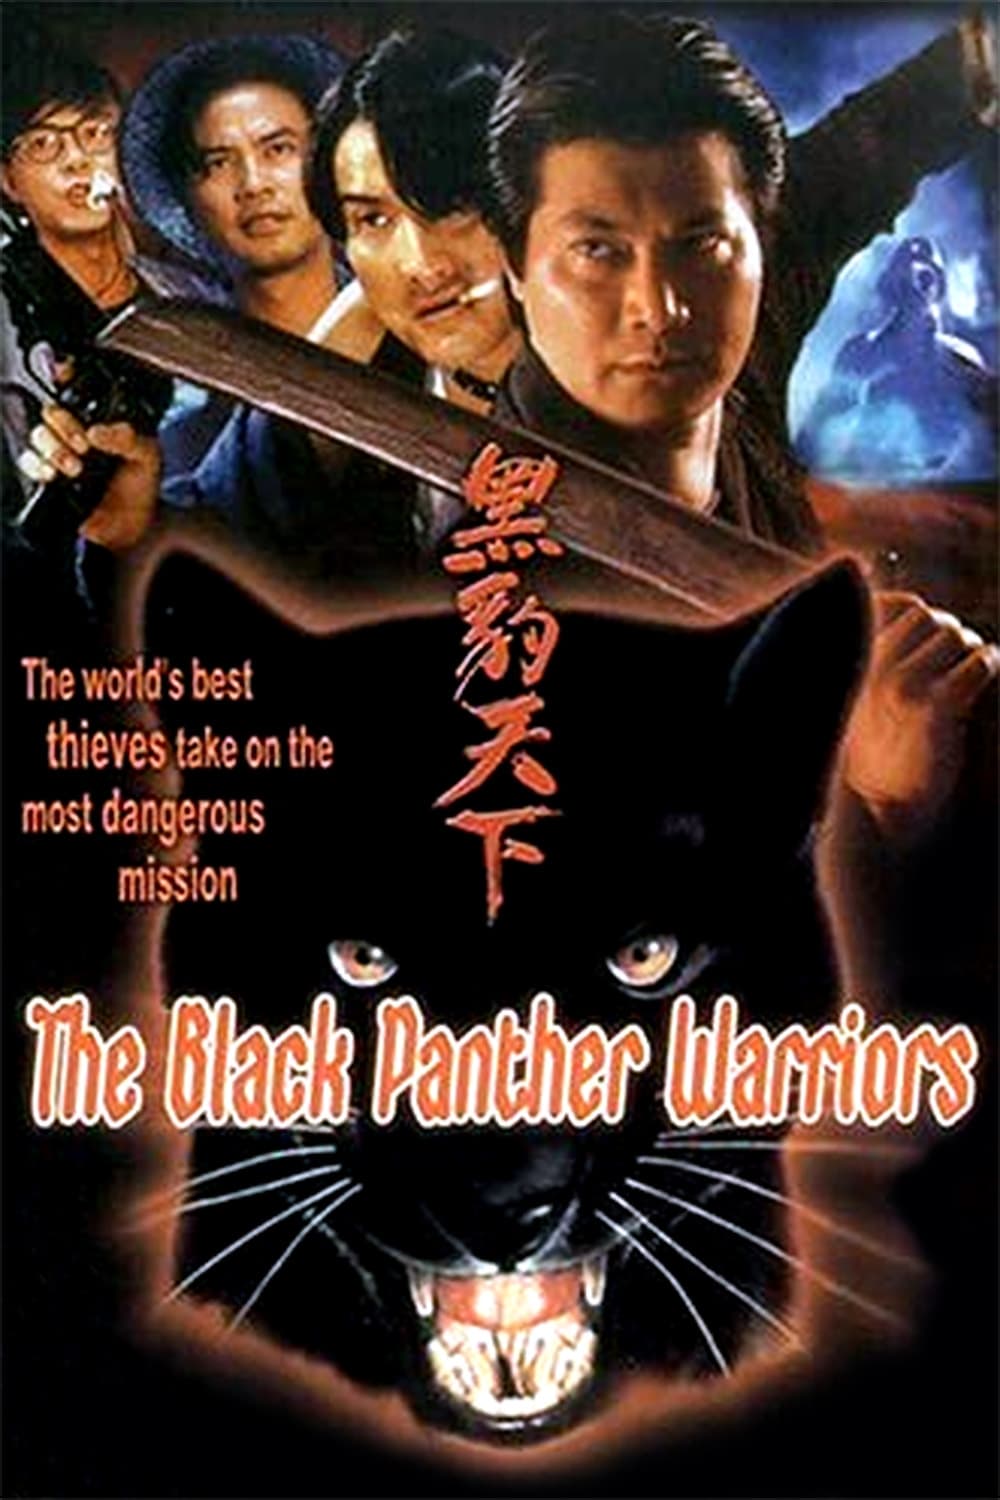 The Black Panther Warriors